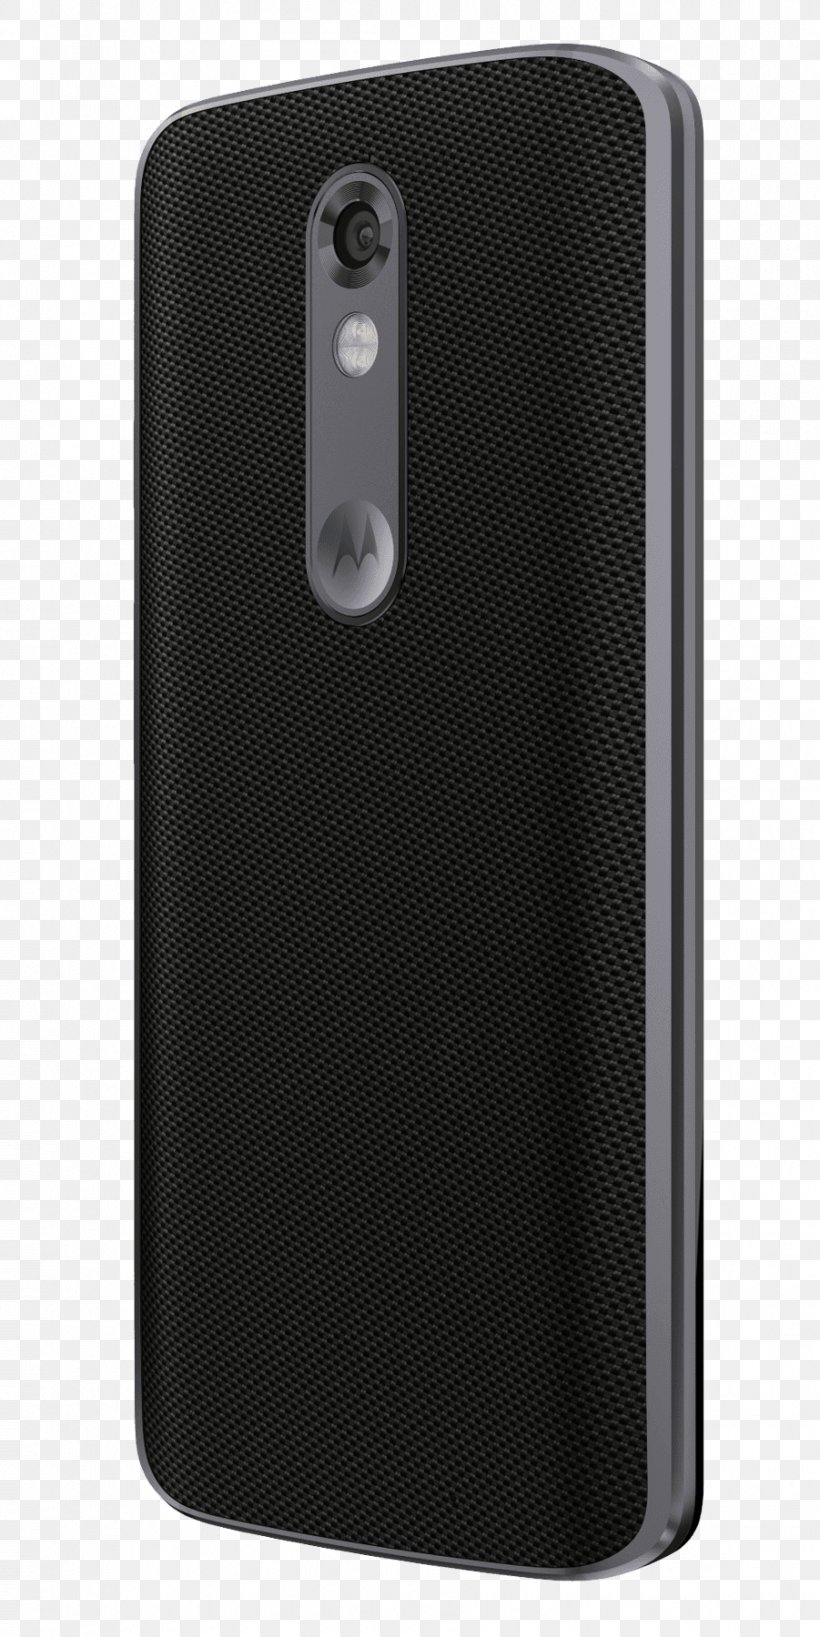 Telephone Smartphone Motorola Mobility Android Mobile Phone Accessories, PNG, 901x1799px, Telephone, Android, Black, Case, Communication Device Download Free